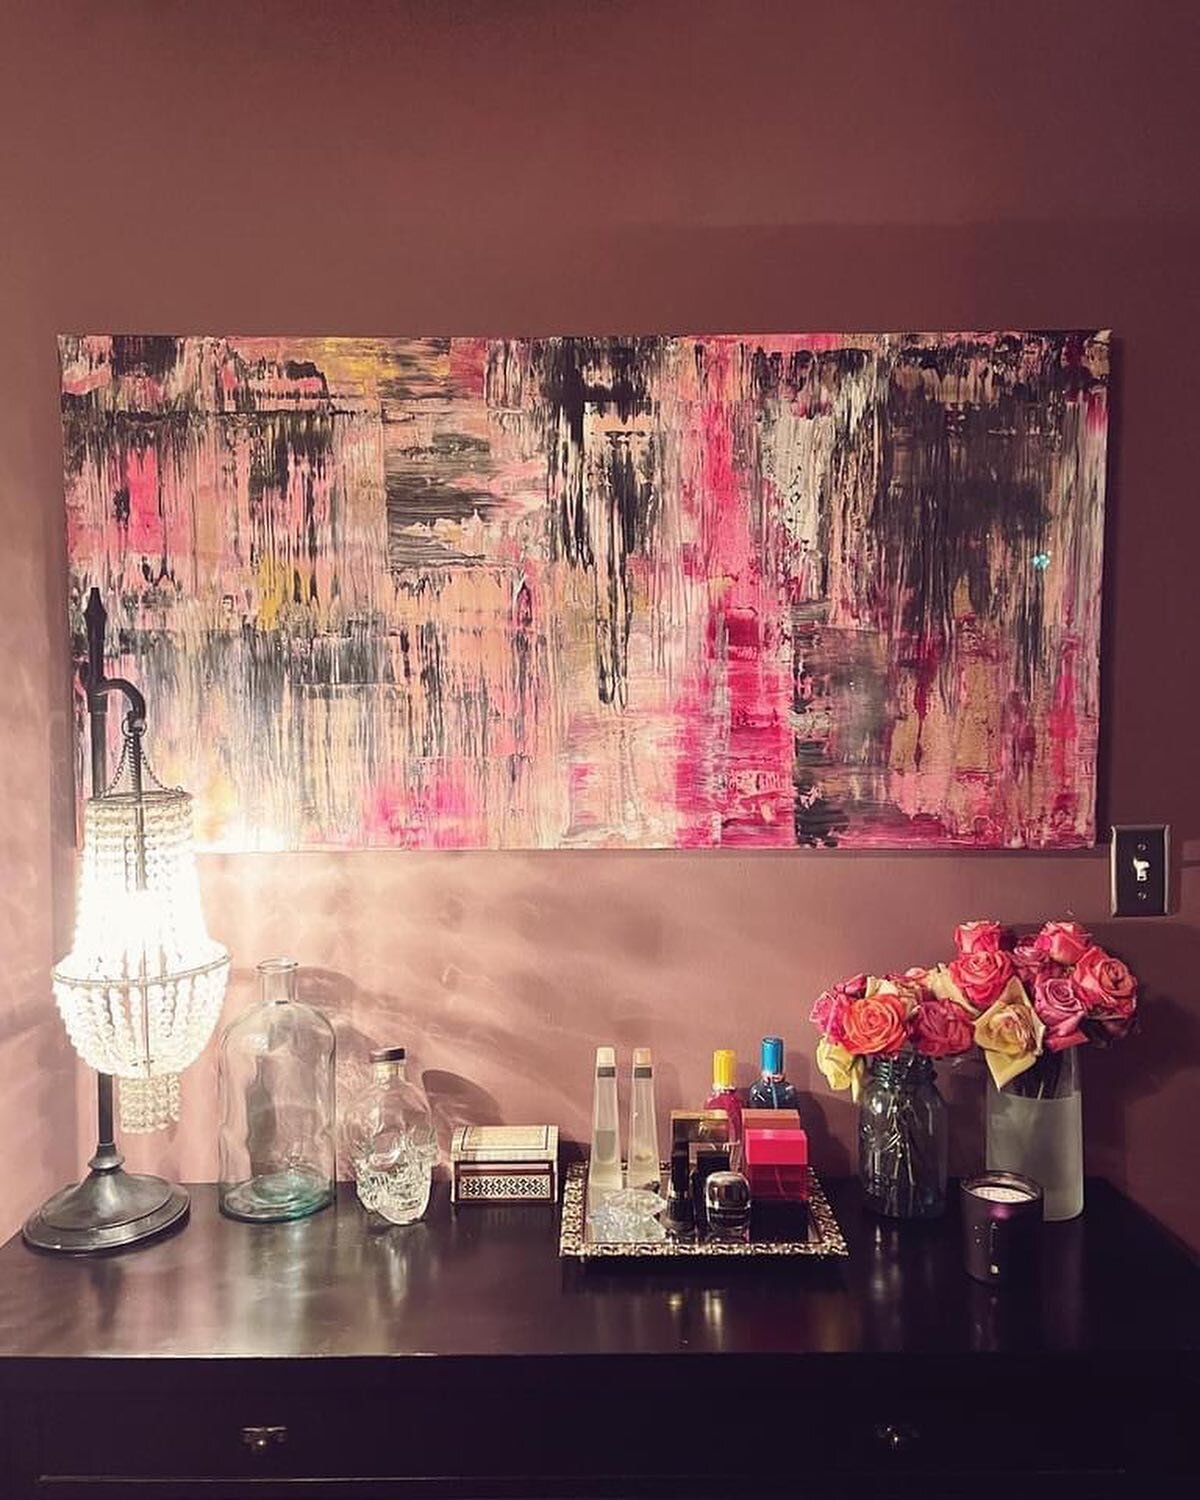 LOVING these pics of my piece in its new home! How romantic and lovely! She also snapped pics of the arrival and unpacking, showing your new art will arrive safely and with style. Thank you for sharing photos, I love seeing where my art lands!
💫💫💫